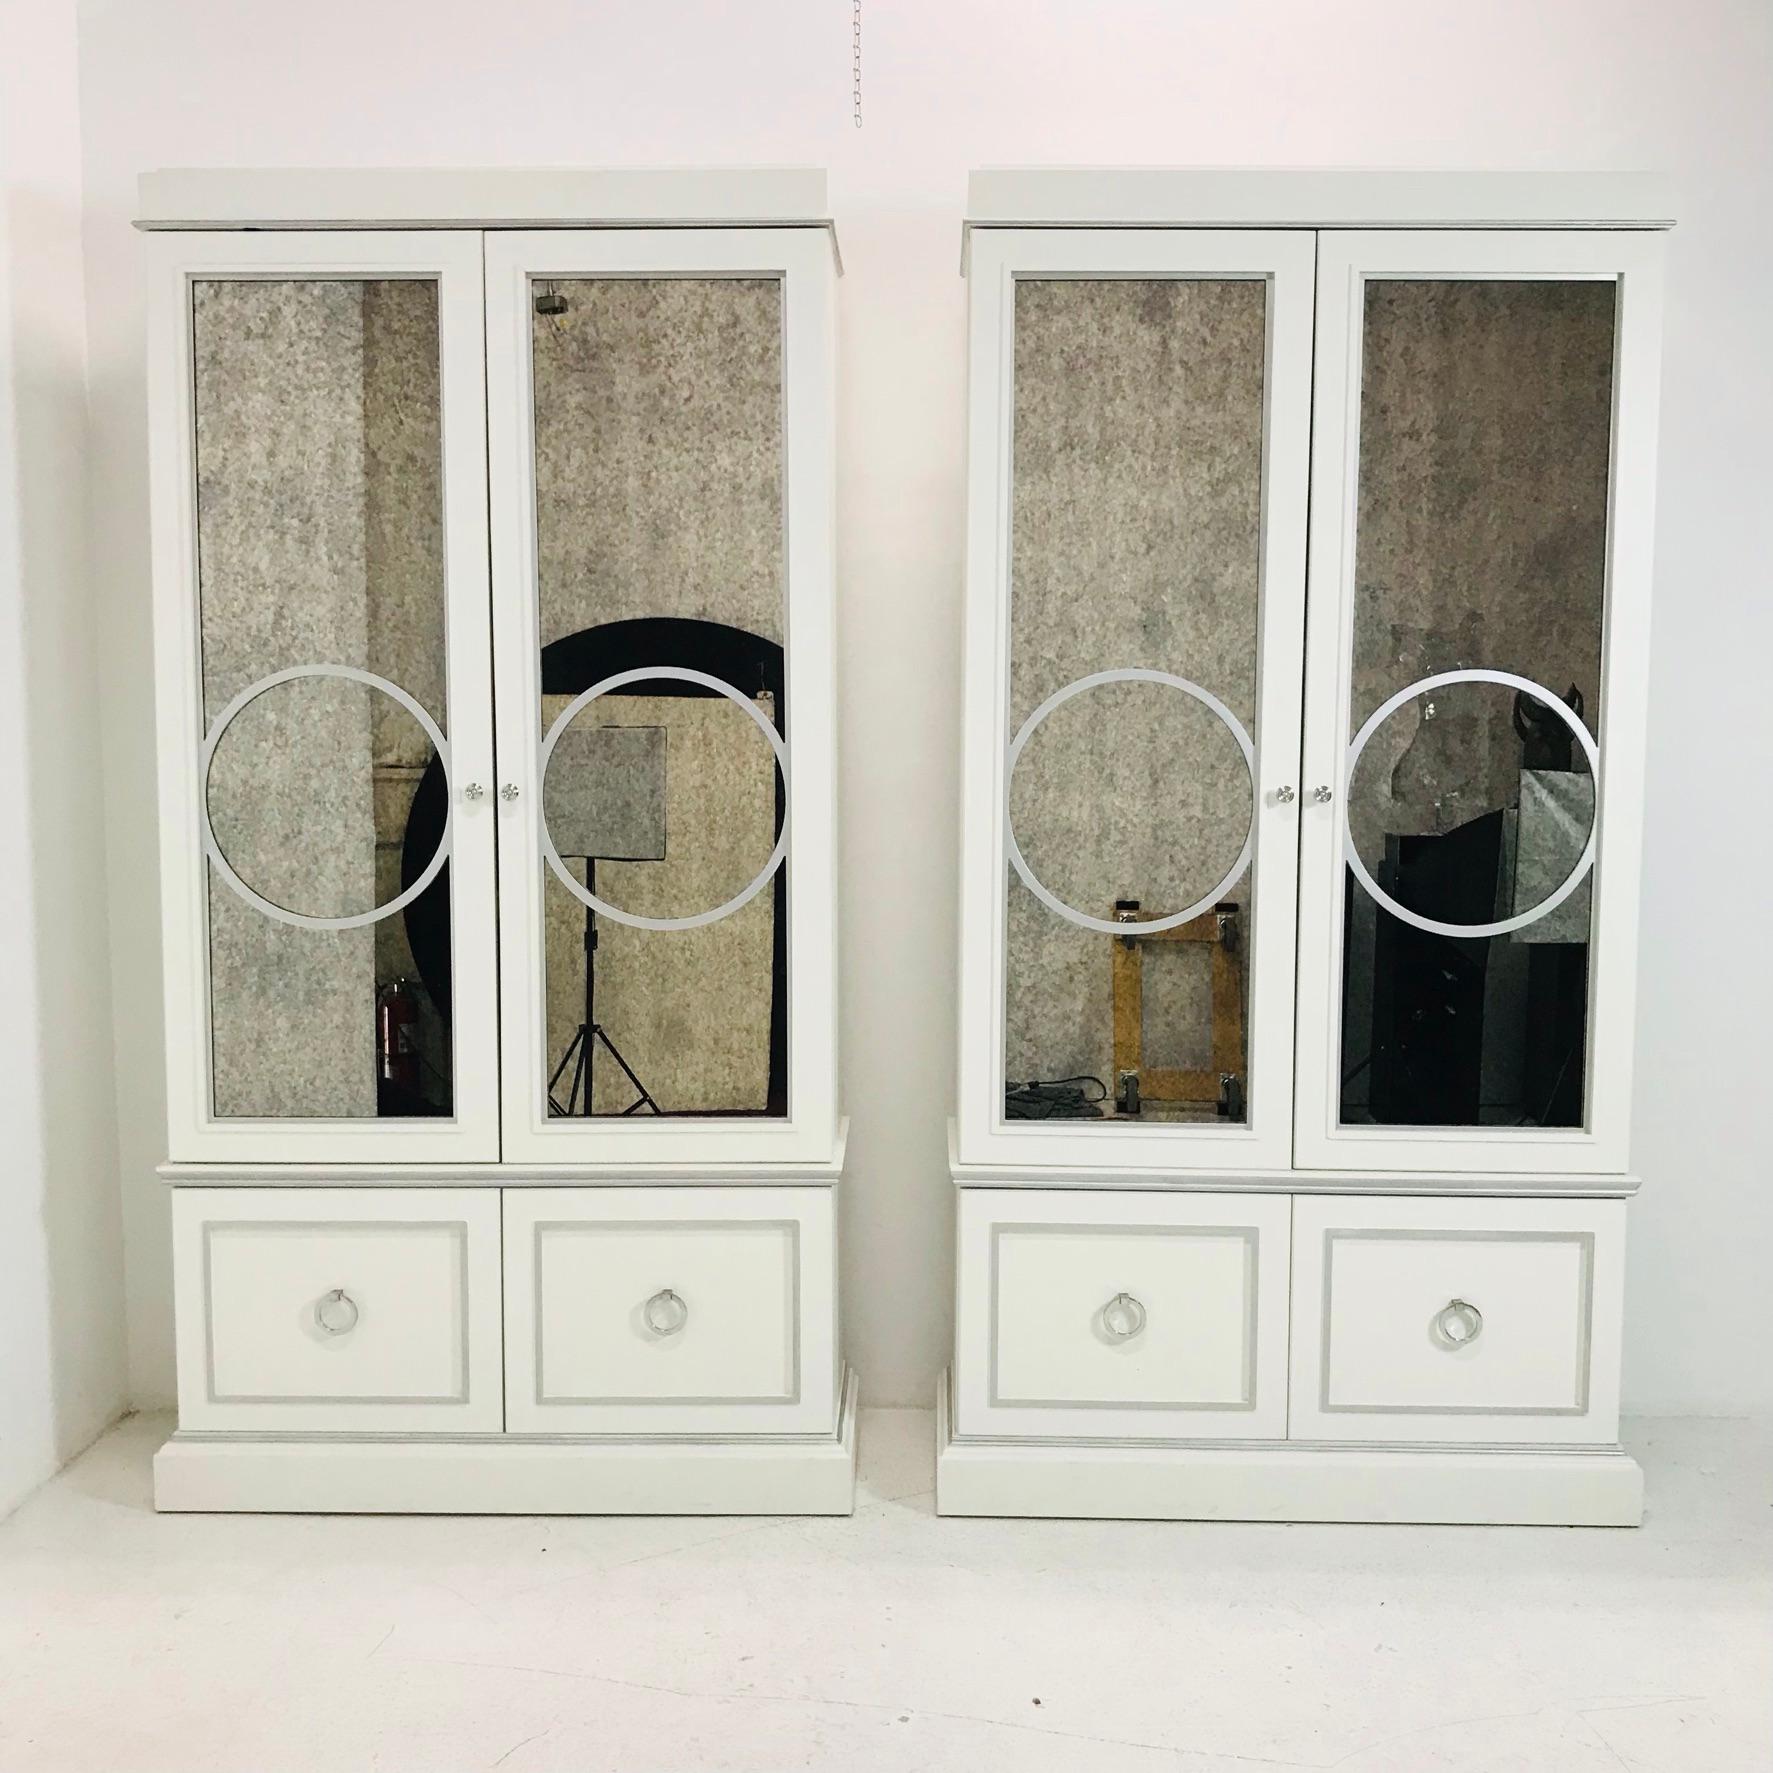 Sophisticated pair of white curio cabinets with antique mirror fronts. These glamorous cabinets feature double doors, interior shelves, and bottom storage drawers. Some minor cosmetic wear due to age and use but structurally very sound and in